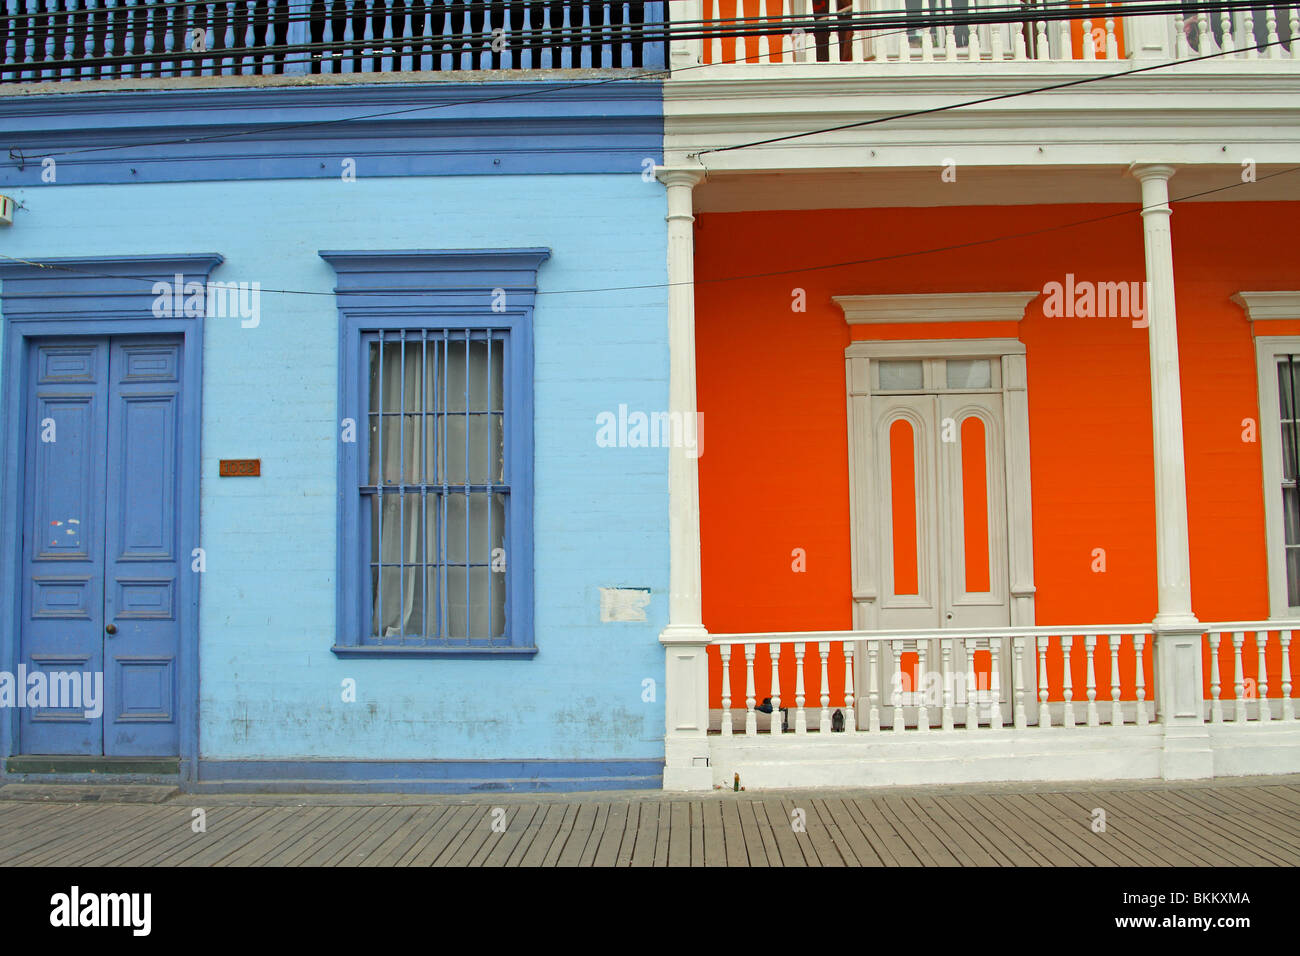 Historic buildings of Calle Baquedano, city of Iquique, Tarapacá region, northern Chile Stock Photo